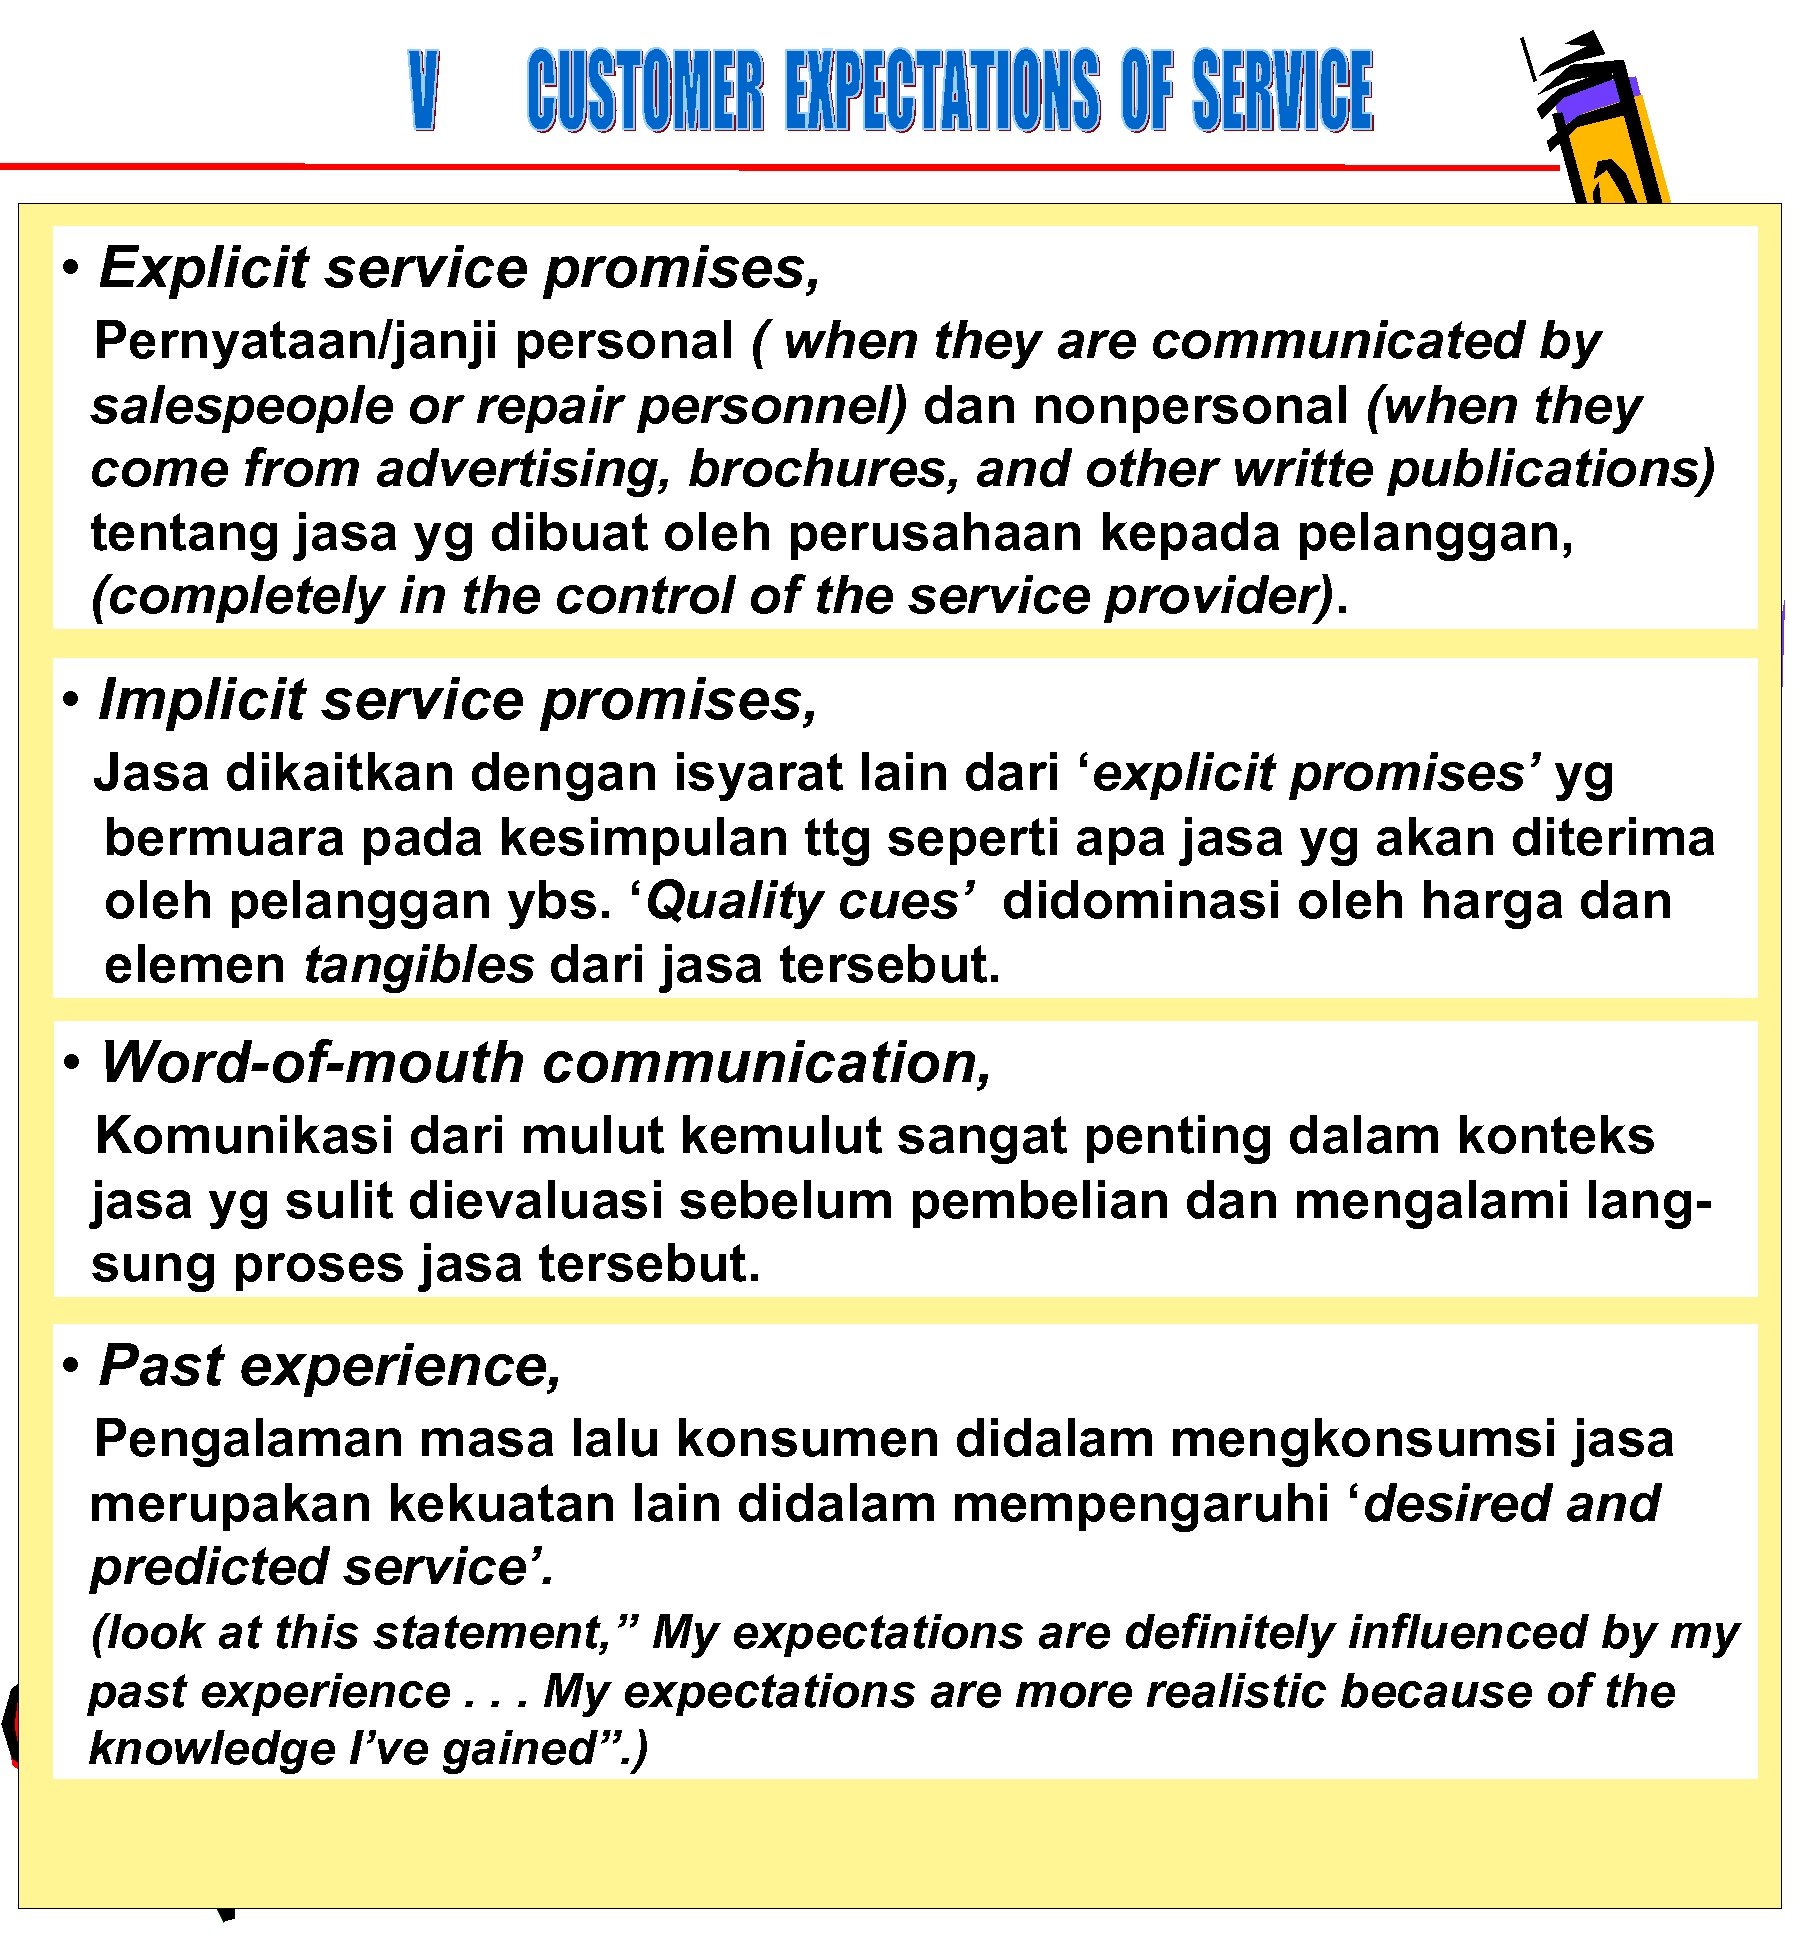  • Explicit service promises, Pernyataan/janji personal ( when they are communicated by salespeople